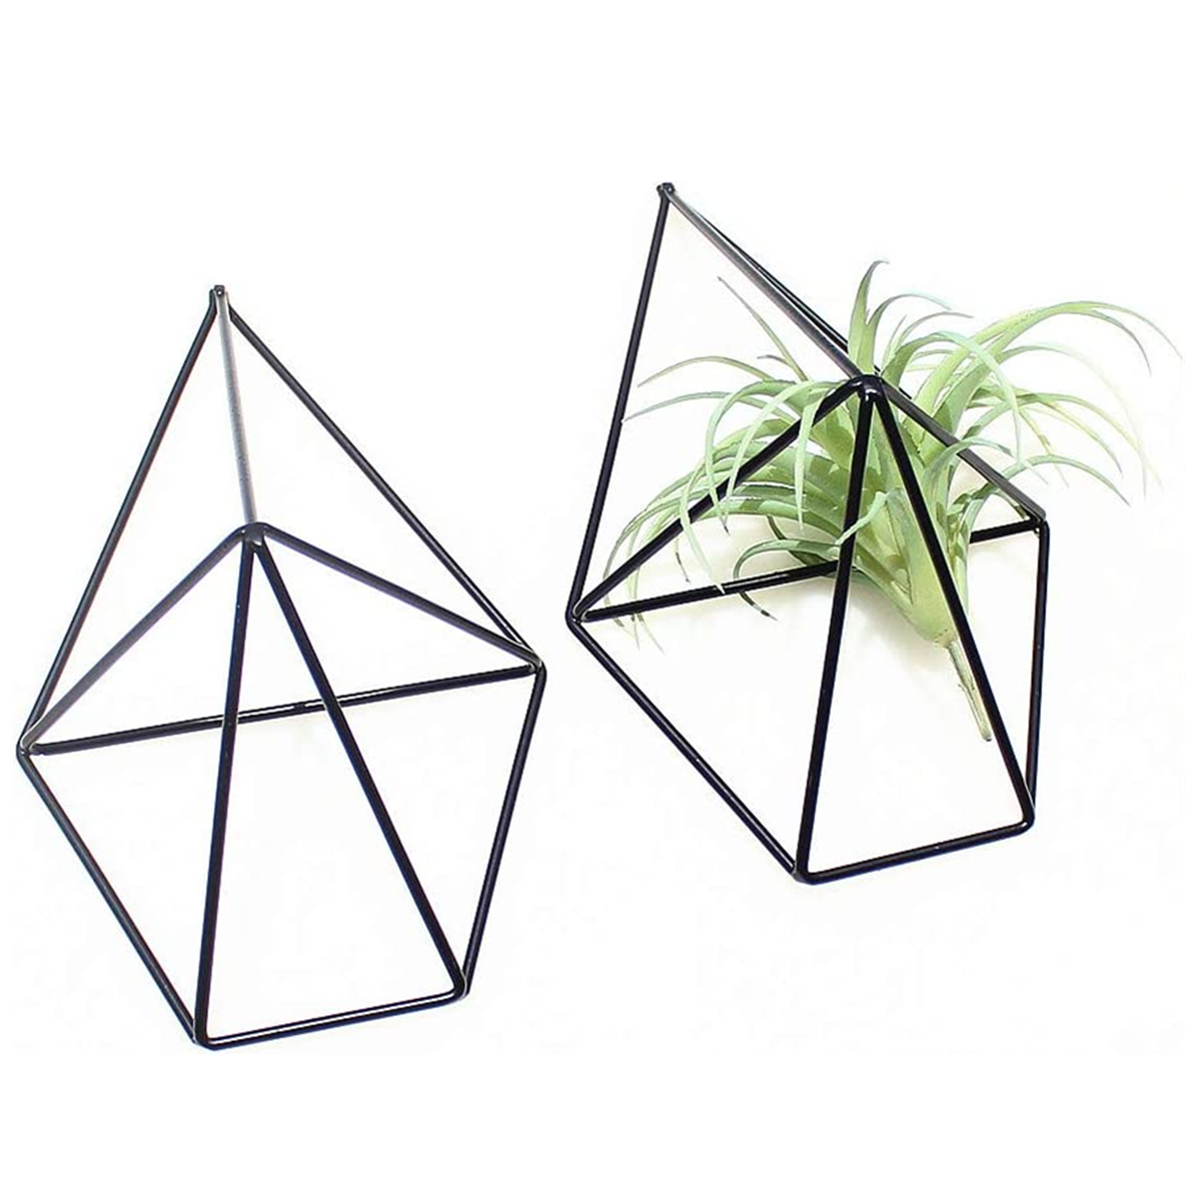 2-Pcs-Wall-Mounted-Geometric-Flower-Stand-Wall-Hanging-Wrought-Iron-Plant-Storage-Rack-Holder-Home-O-1736564-5